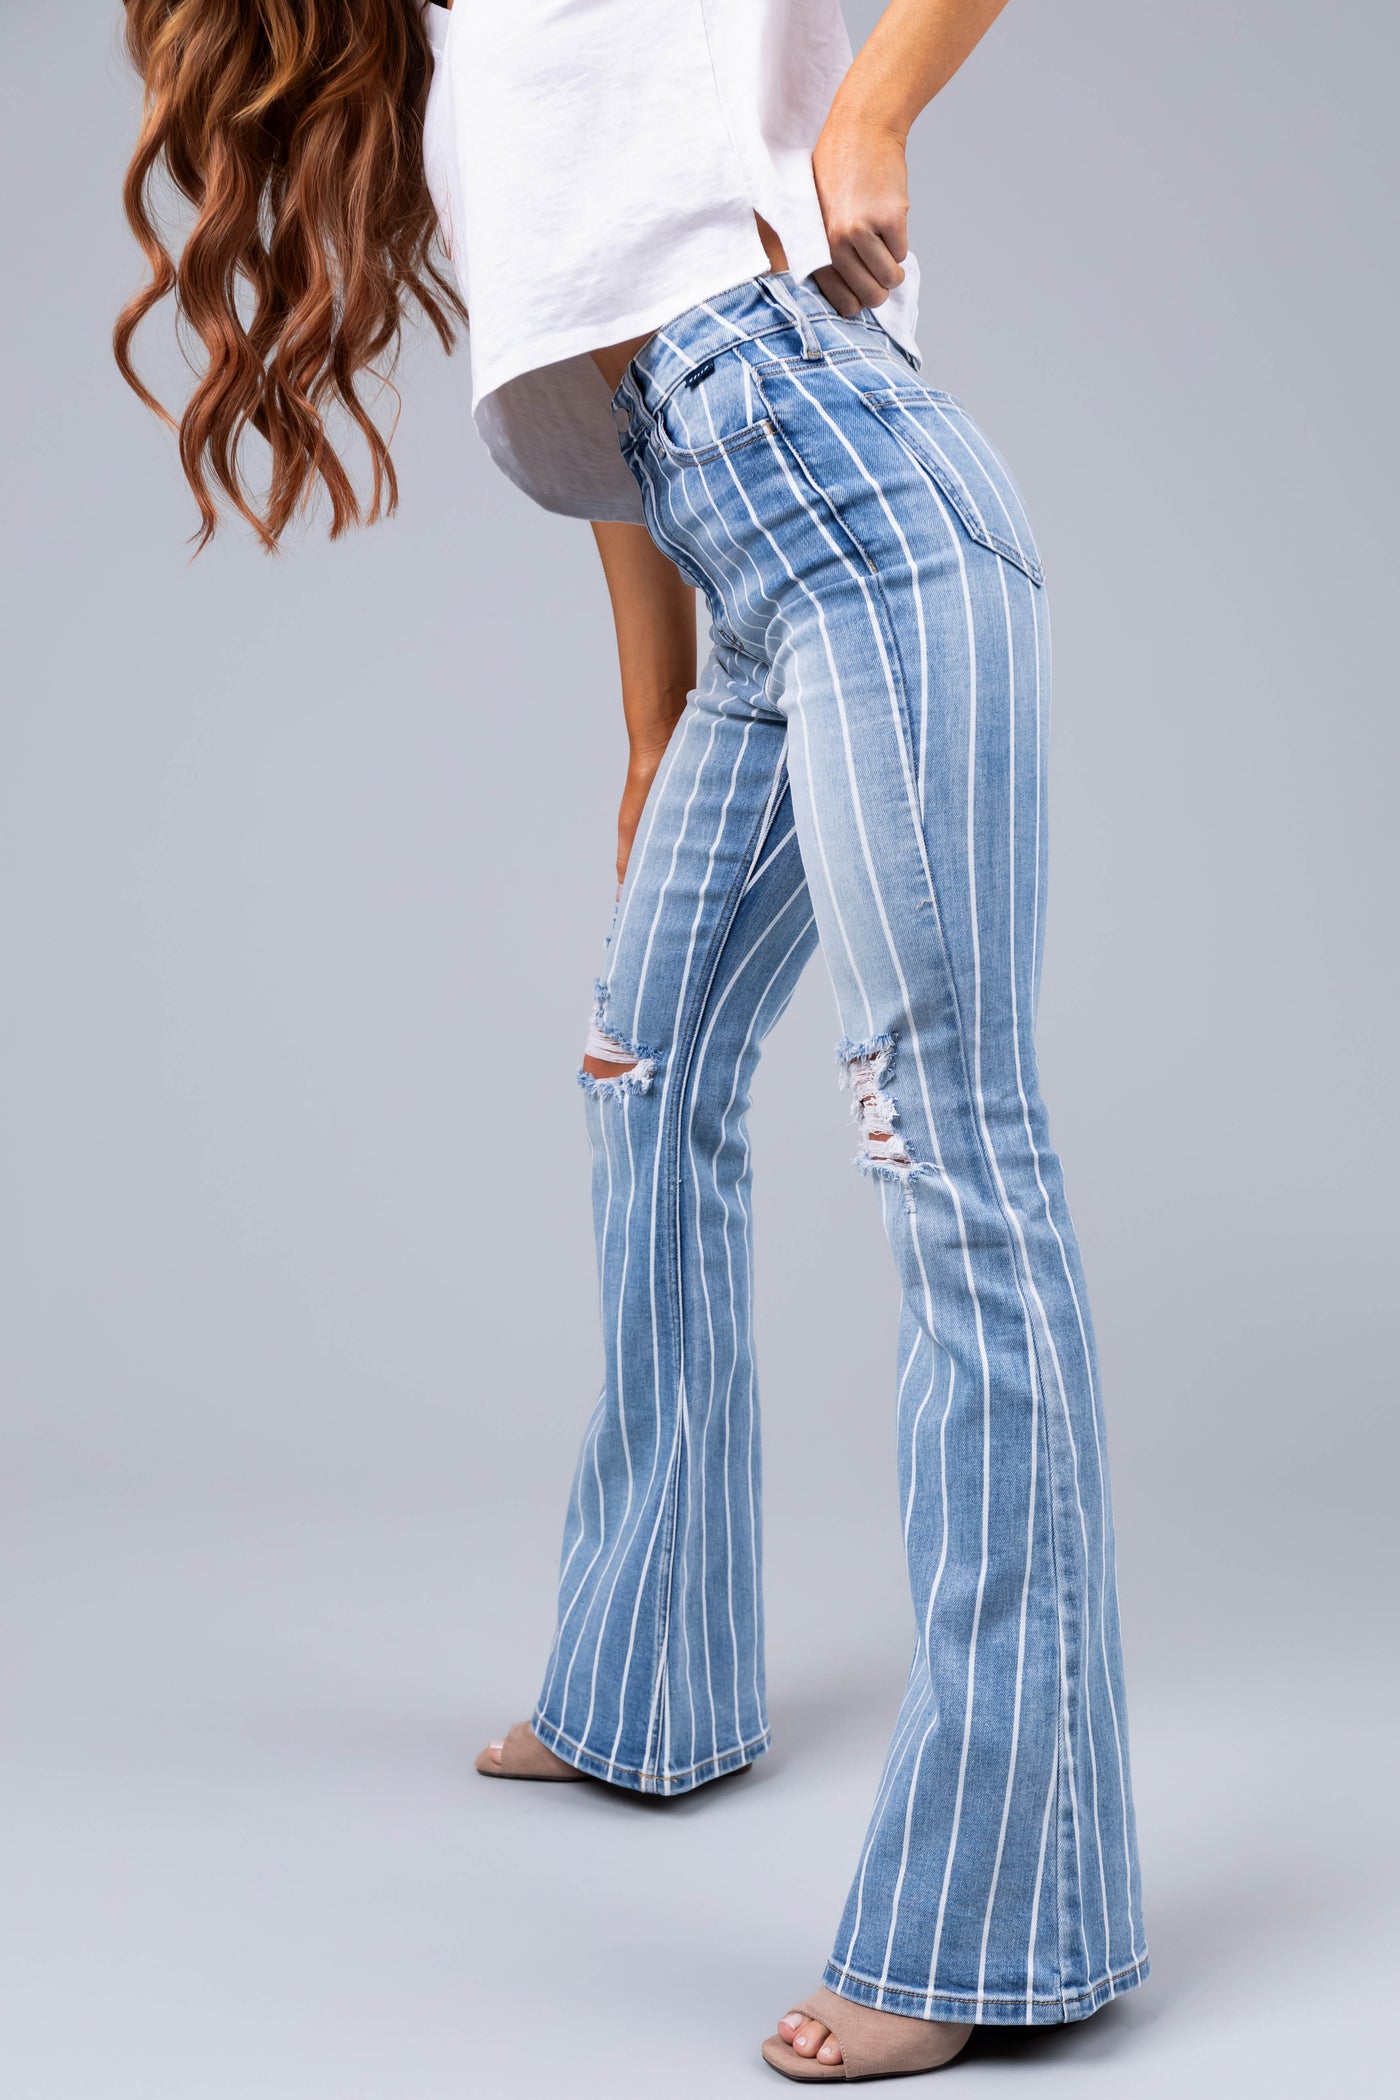 Cello Light Wash Striped High Rise Flare Jeans